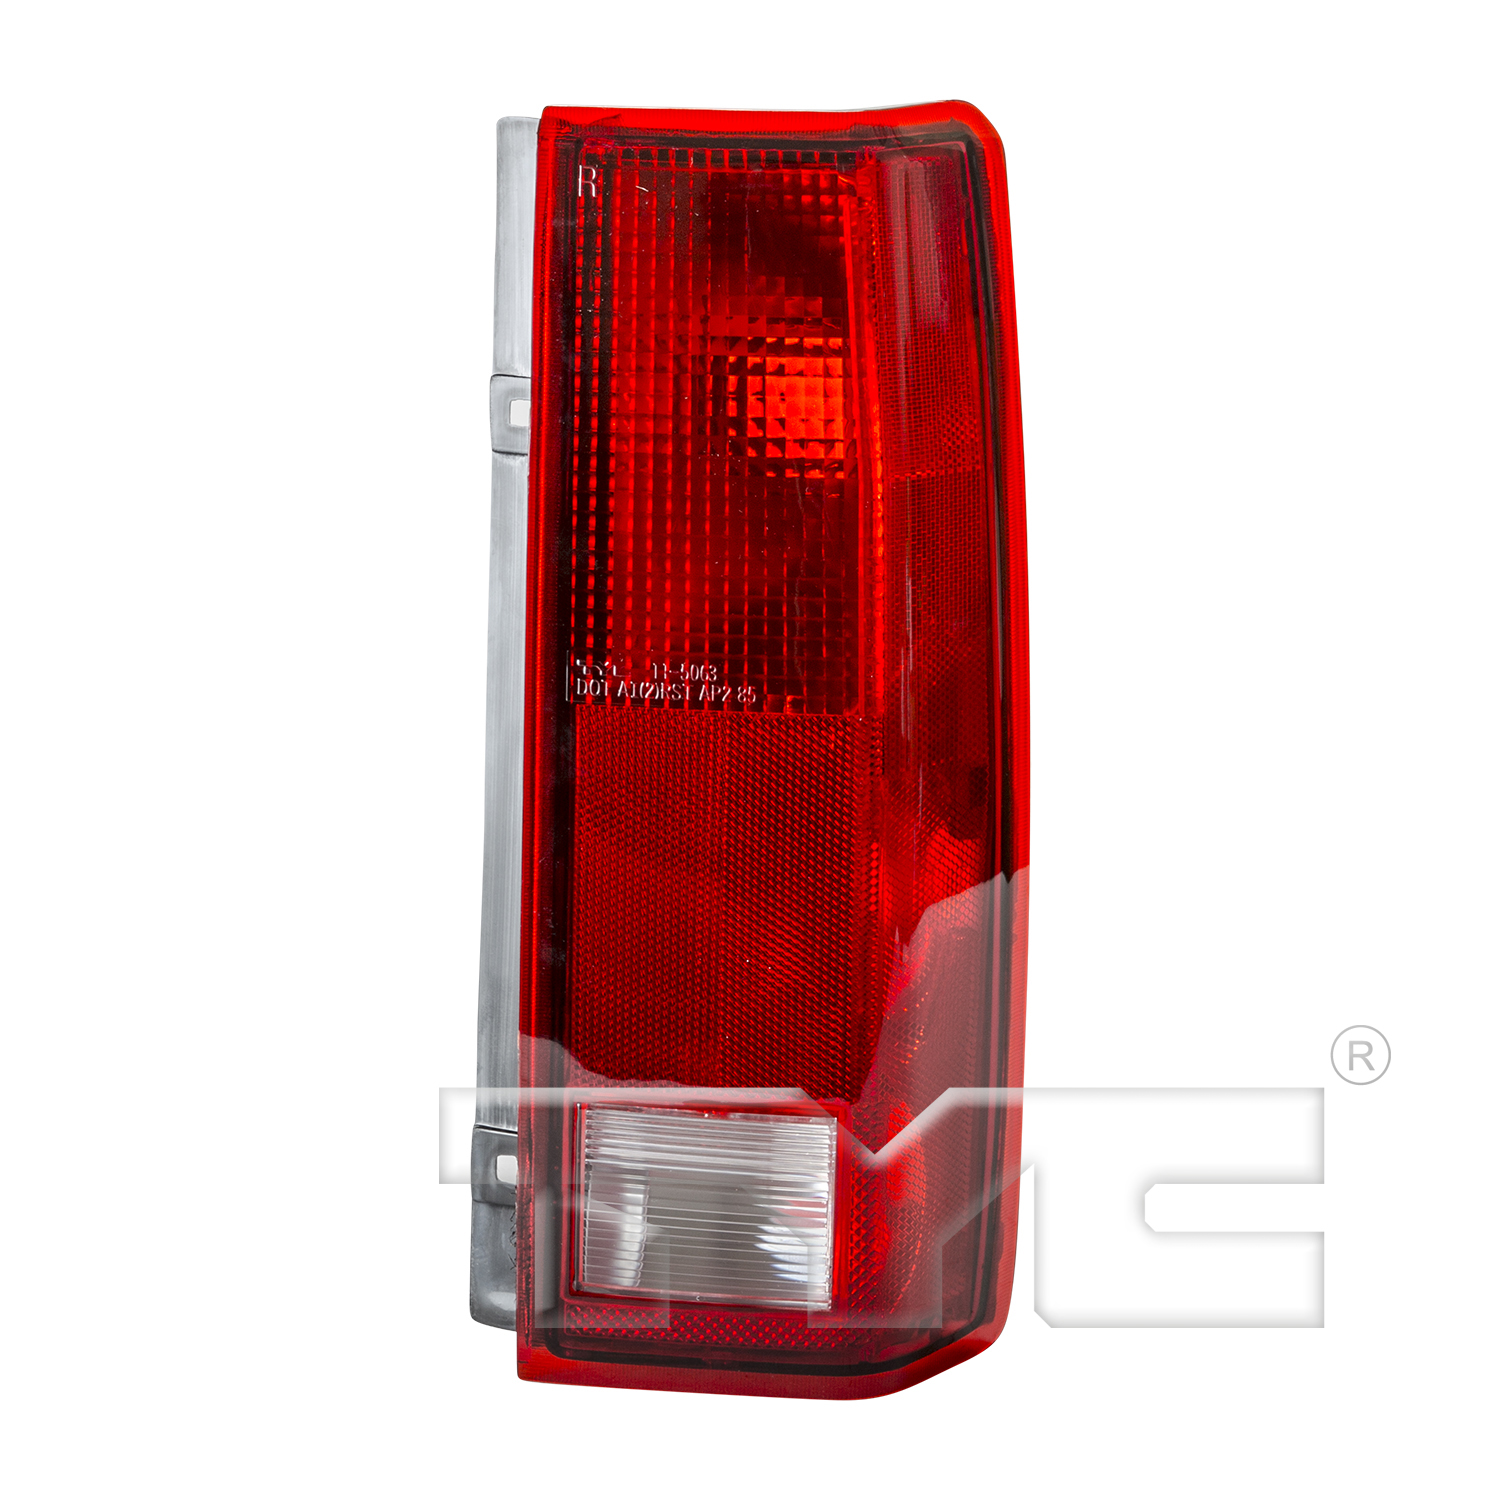 Aftermarket TAILLIGHTS for CHEVROLET - ASTRO, ASTRO,85-05,RT Taillamp assy